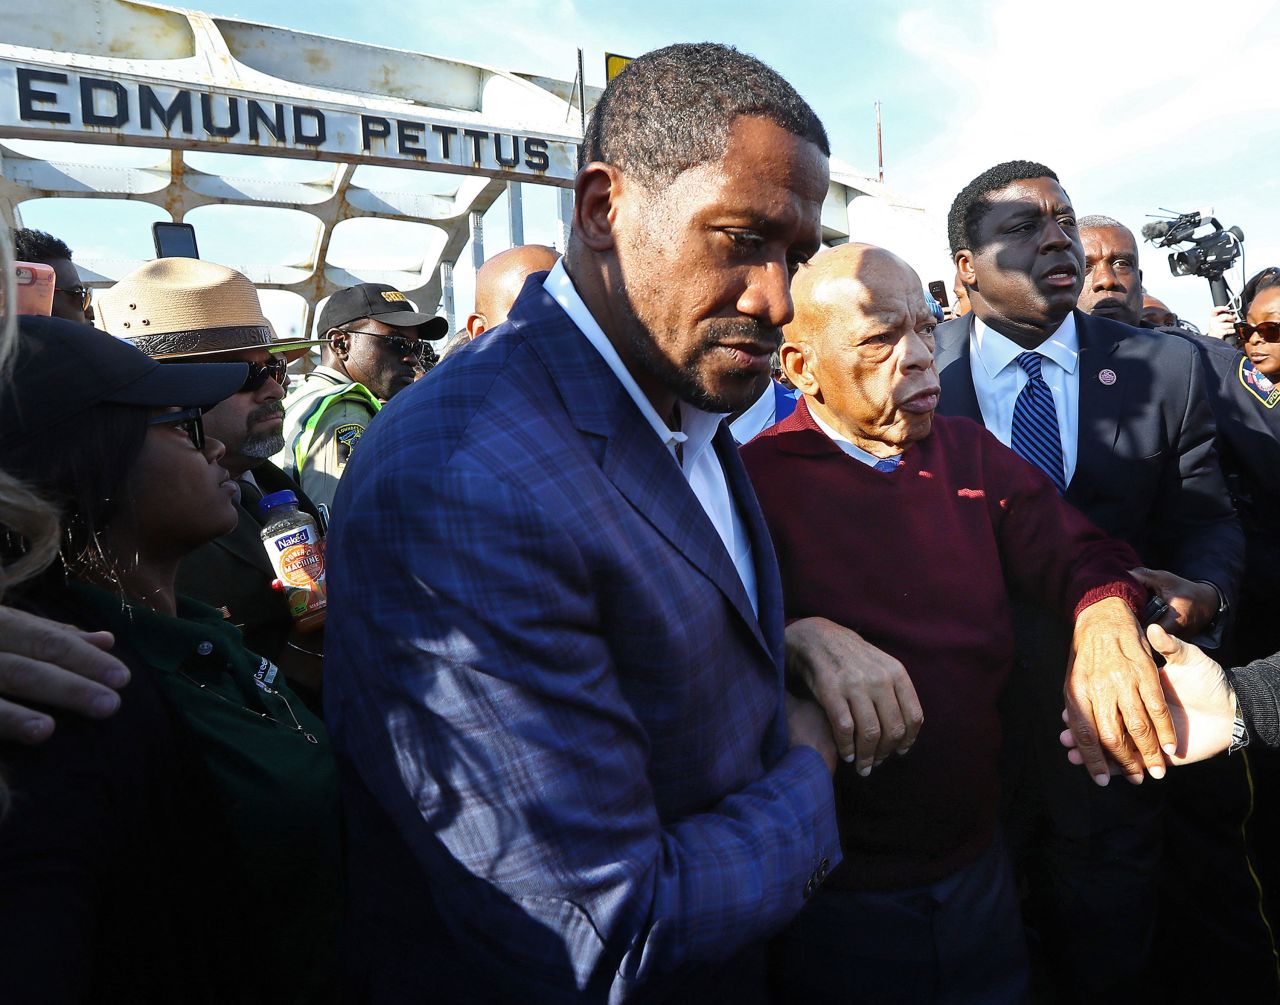 Lewis is assisted near Selma's Edmund Pettus Bridge while attending a March 2020 ceremony marking the 55th anniversary of "Bloody Sunday." A few months earlier, Lewis' office announced that he had been diagnosed with stage 4 pancreatic cancer.